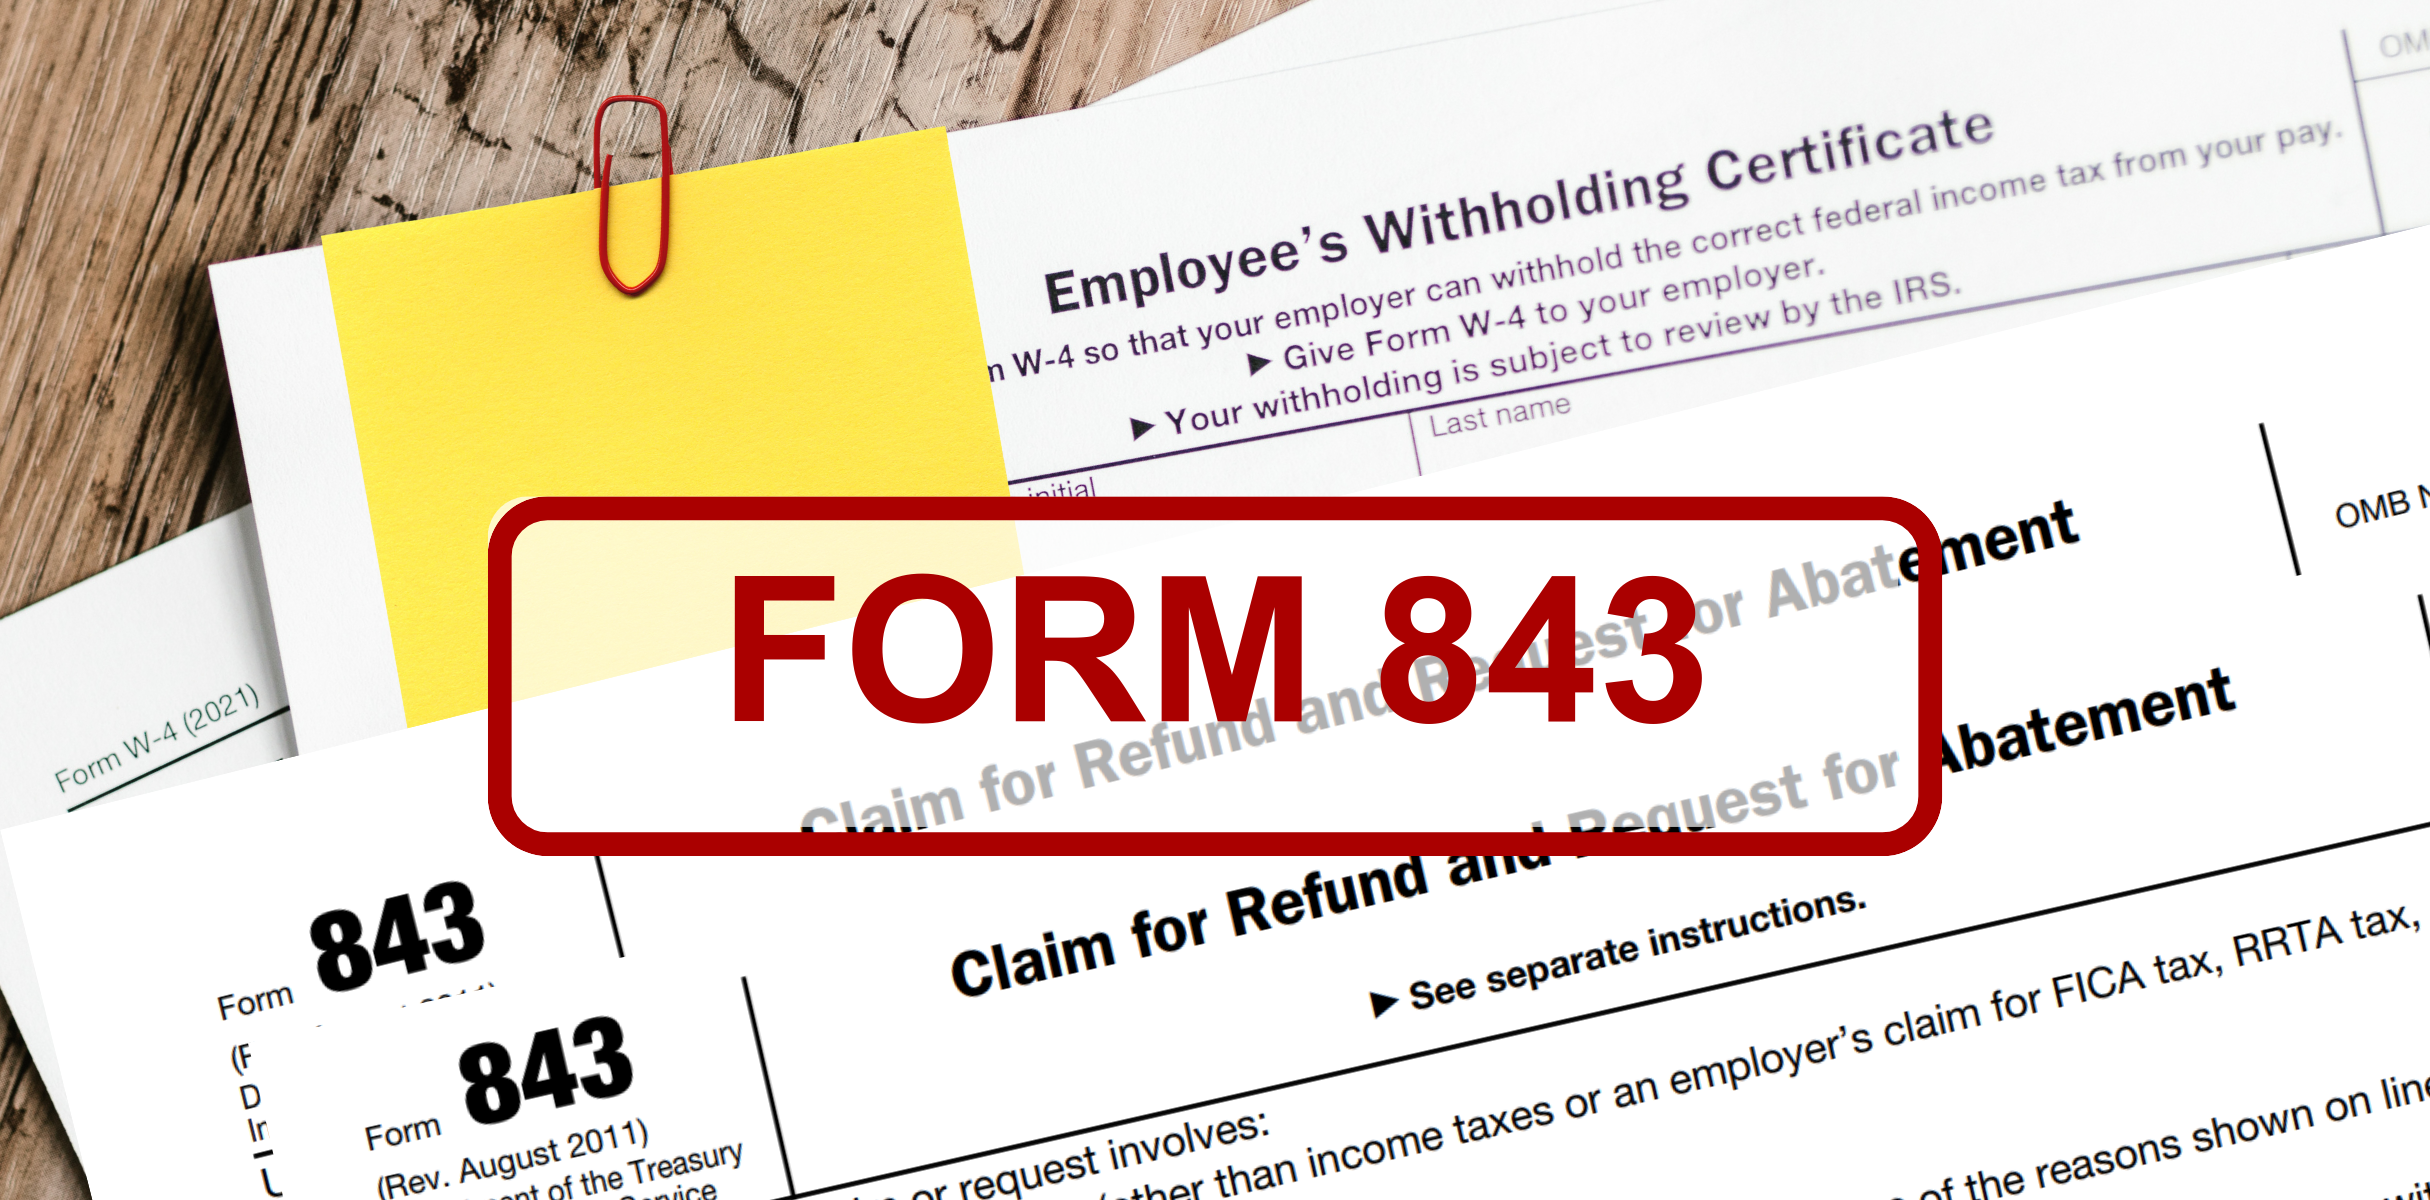 A Quick Guide to IRS Form 843